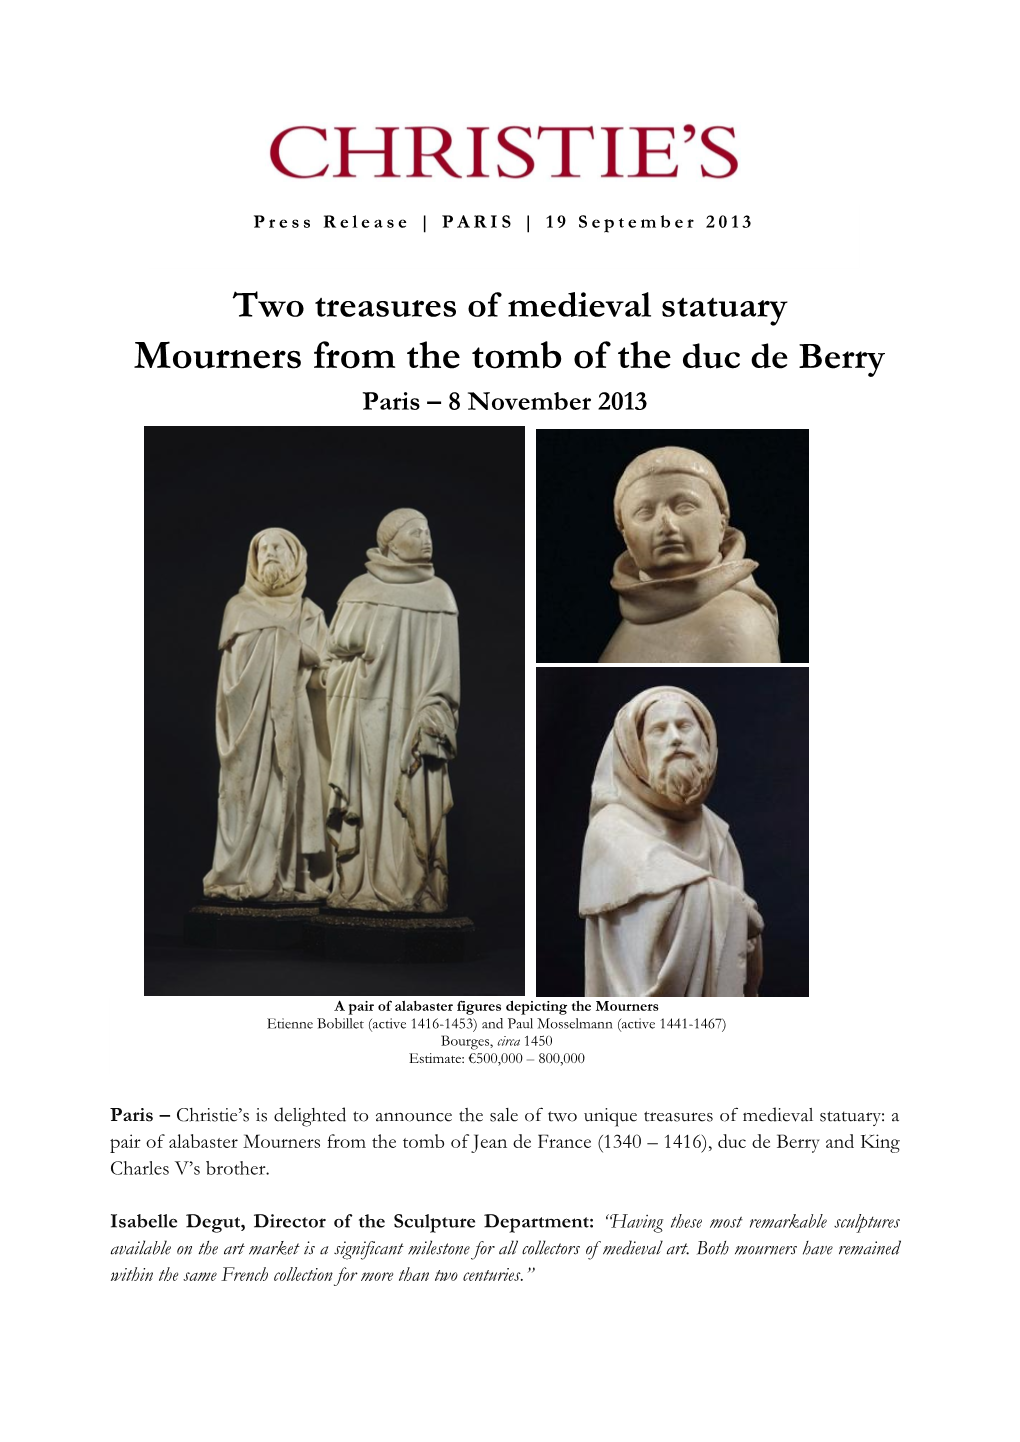 Mourners from the Tomb of the Duc De Berry Paris – 8 November 2013